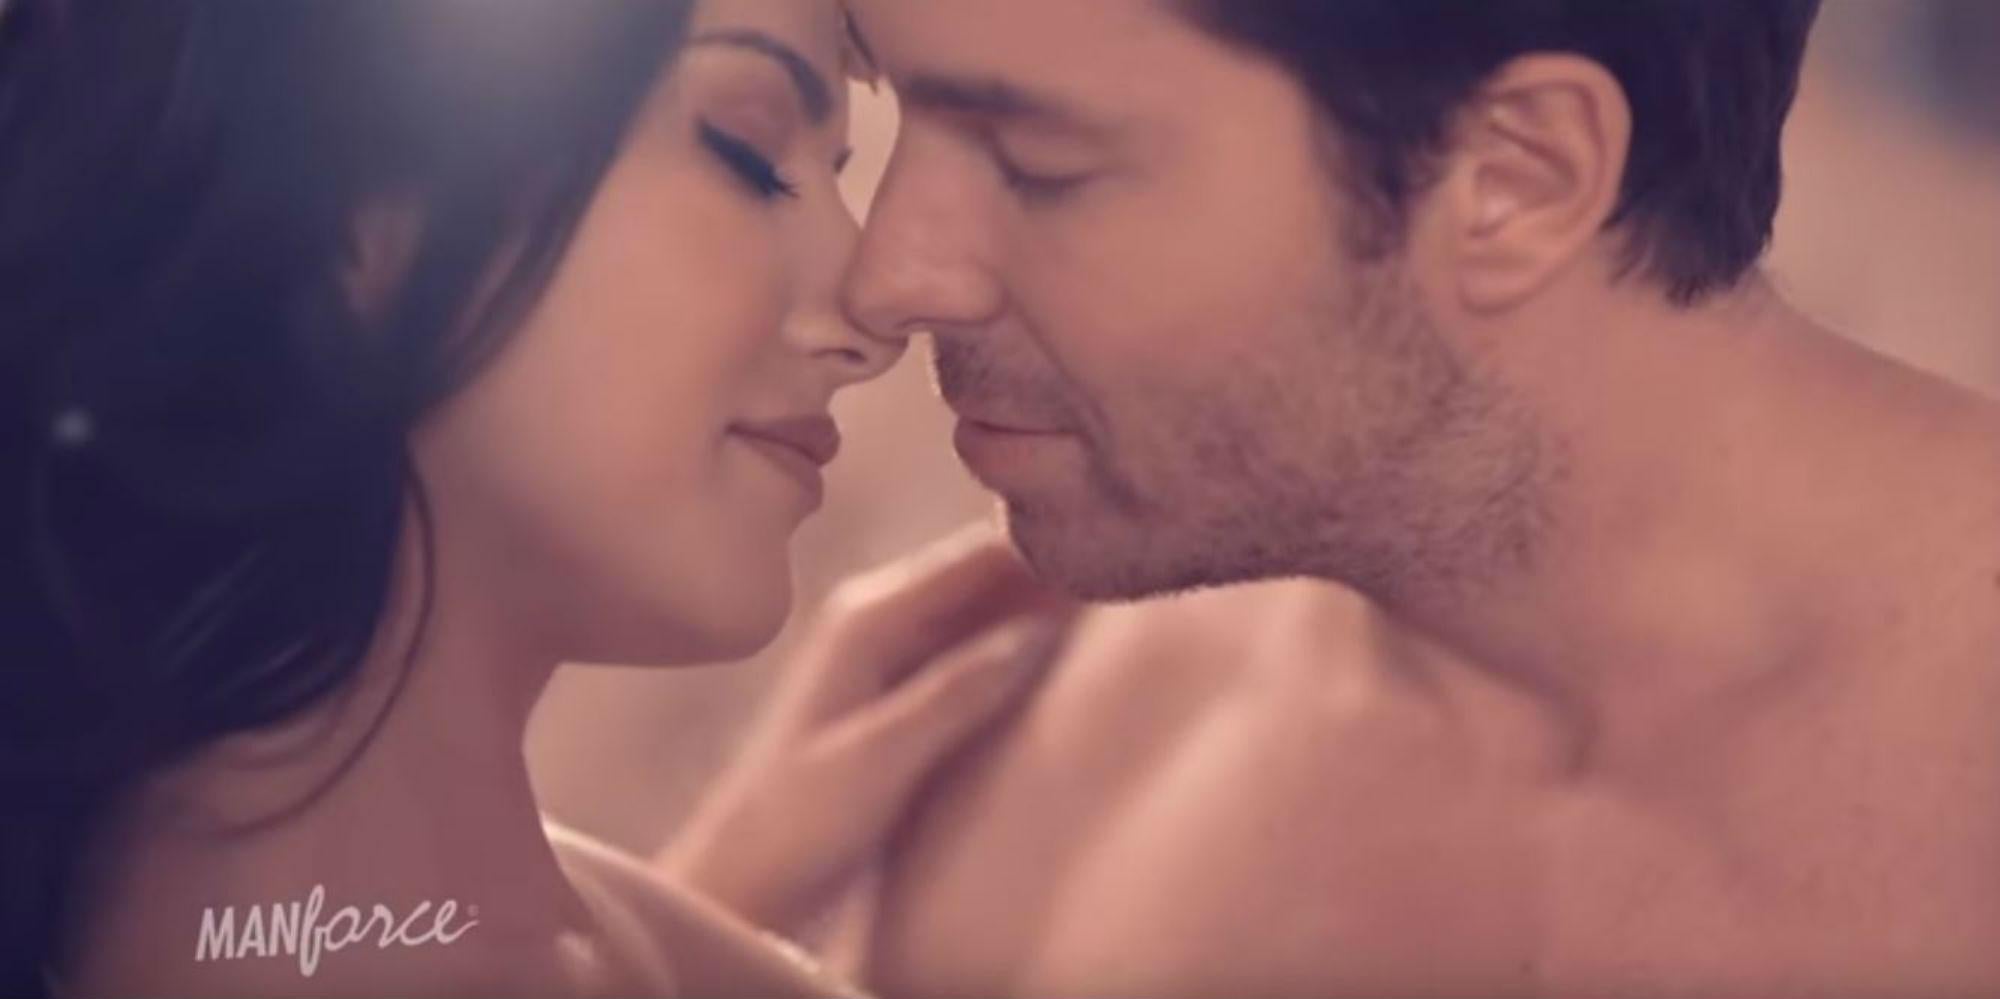 A condom advert featuring an ex porn star is causing fury in India |  indy100 | indy100